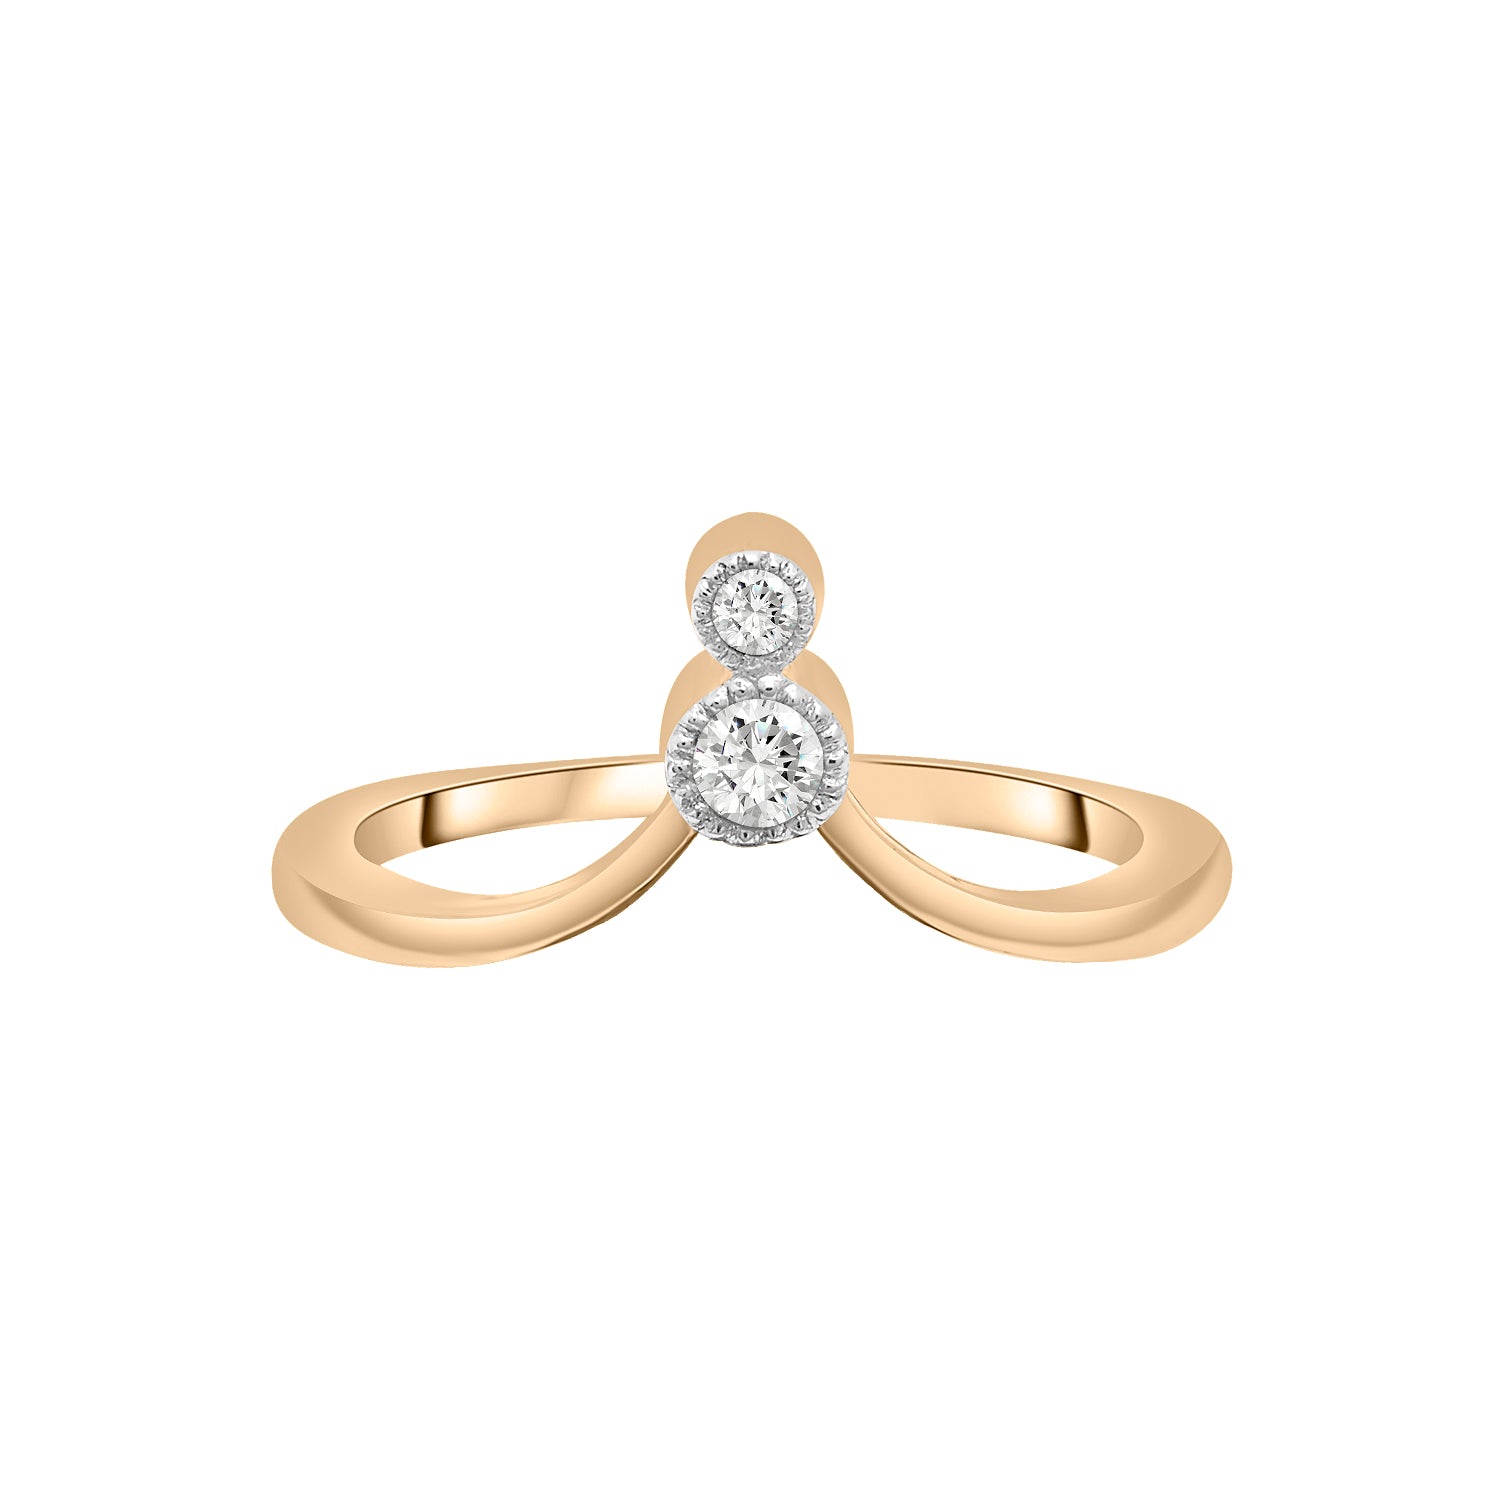 Heluviee Arched Diamond Ring